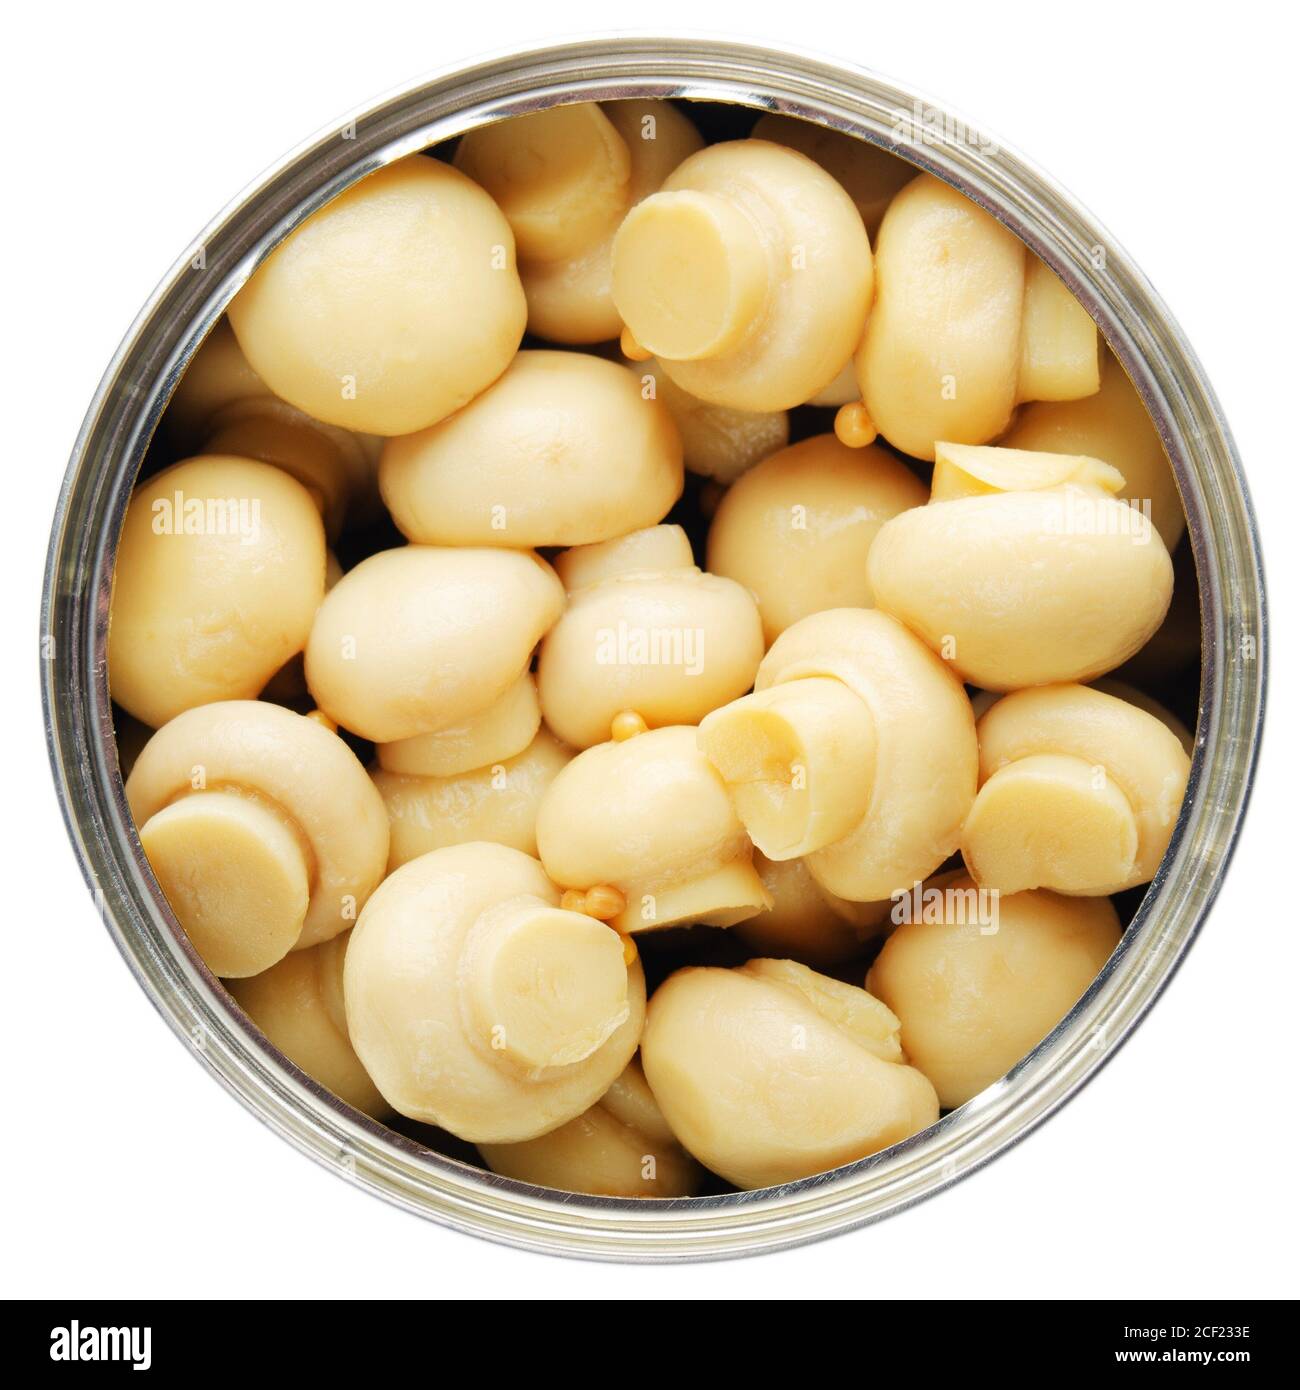 flat-lay-view-at-opened-tin-can-with-button-mushrooms-isolated-on-white-background-2CF233E.jpg